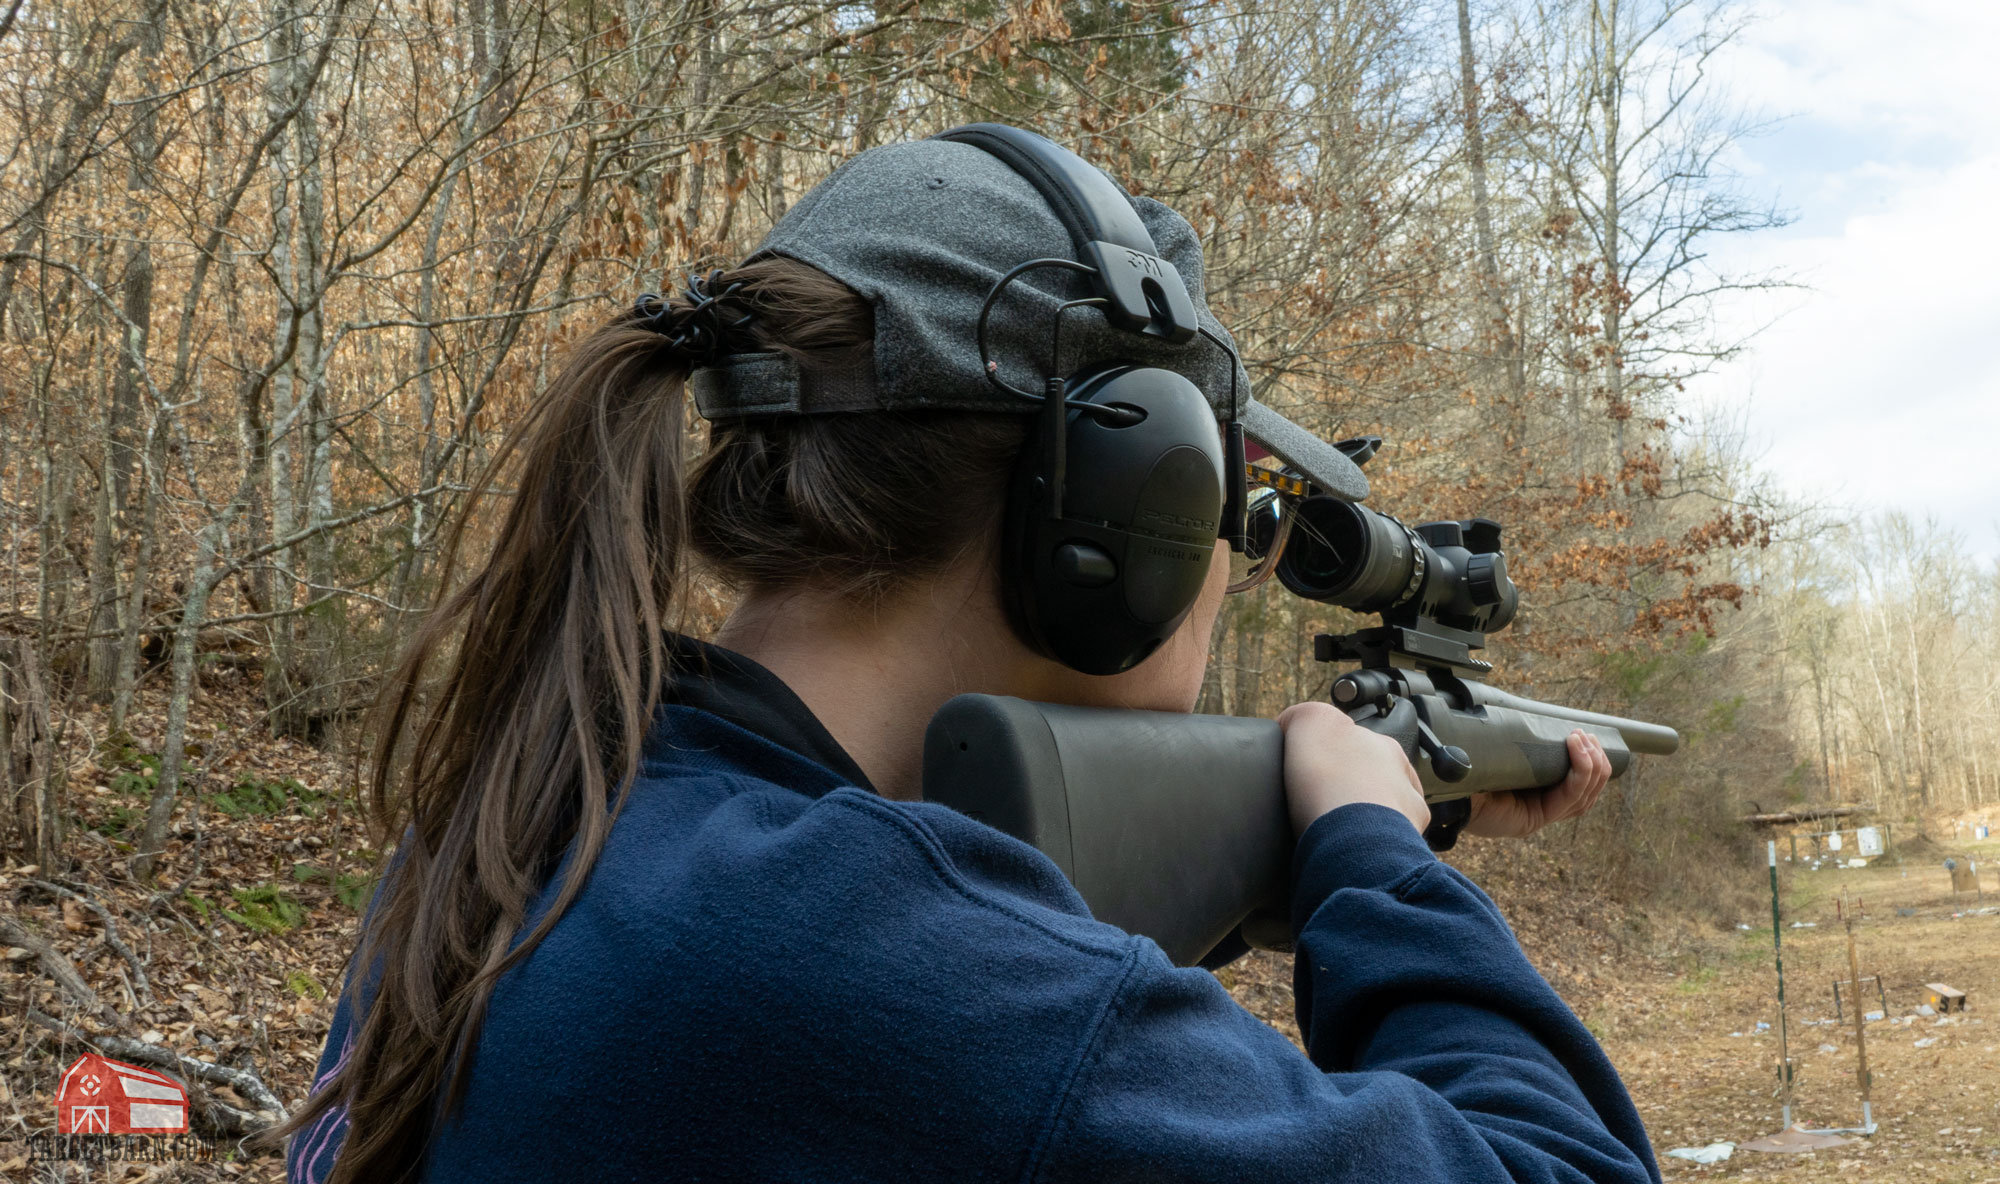 mckenzie shooting a scoped rifle at the range